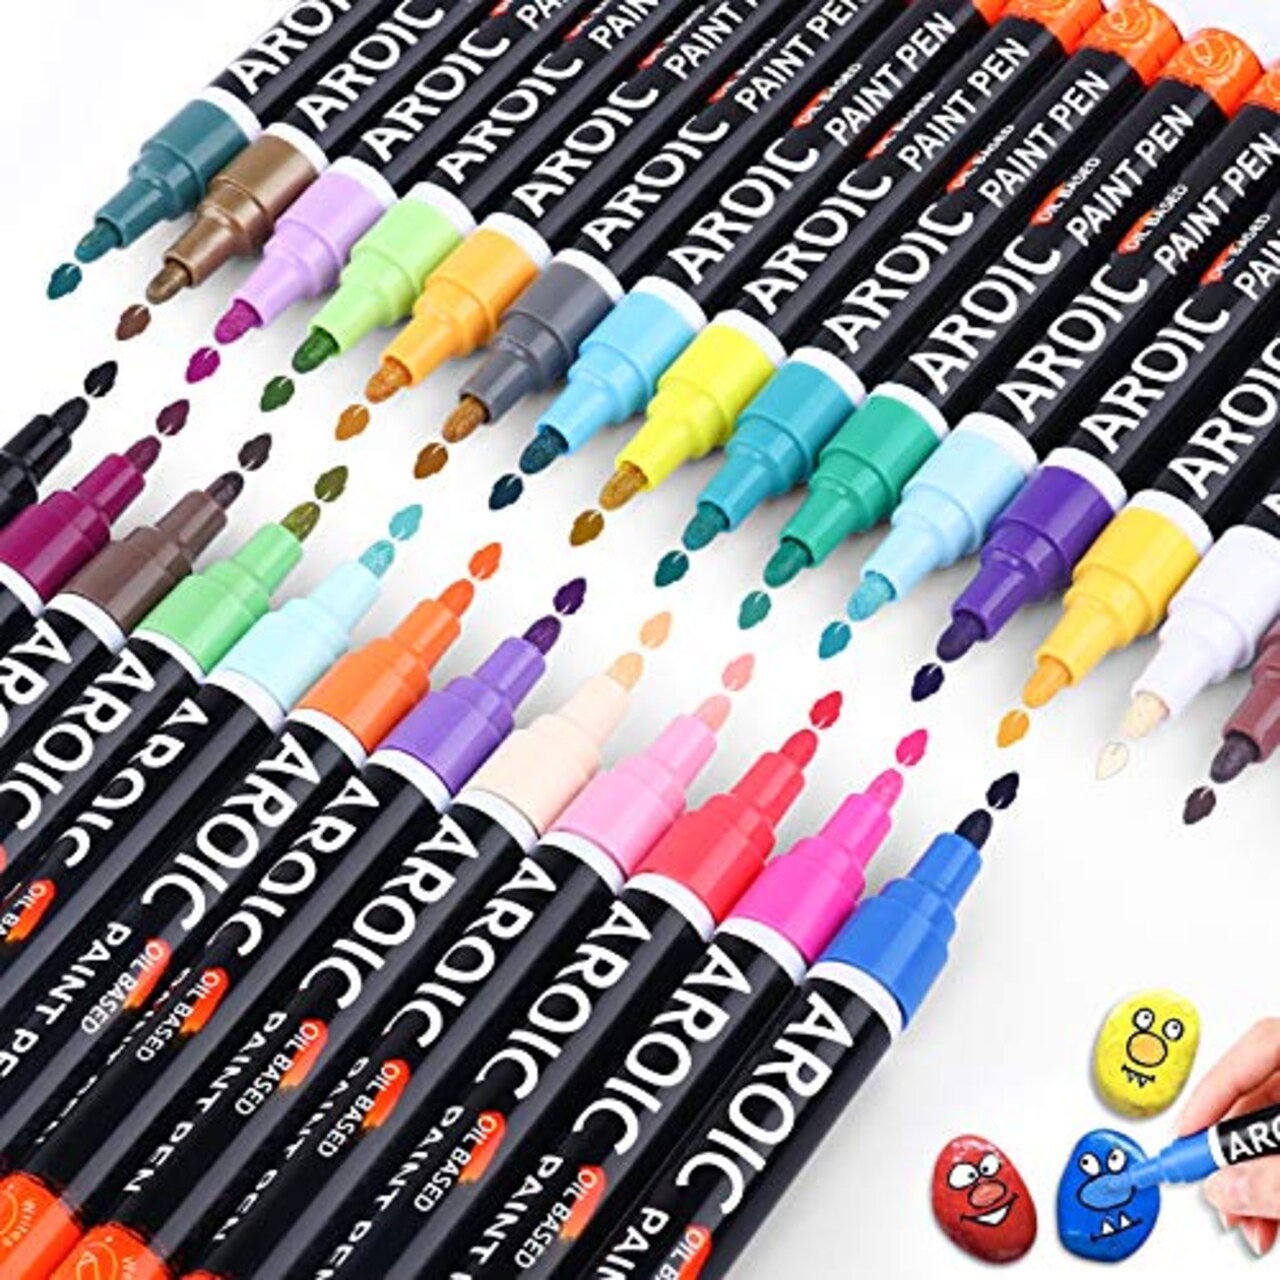 AROIC Paint Markers, 28 Colors Oil-Based Waterproof Paint Marker Pen Set.  Posca Paint Markers for Rock, Wood, Metal, Plastic, Glass, Canvas, Ceramic  & More! Safe and odorless.